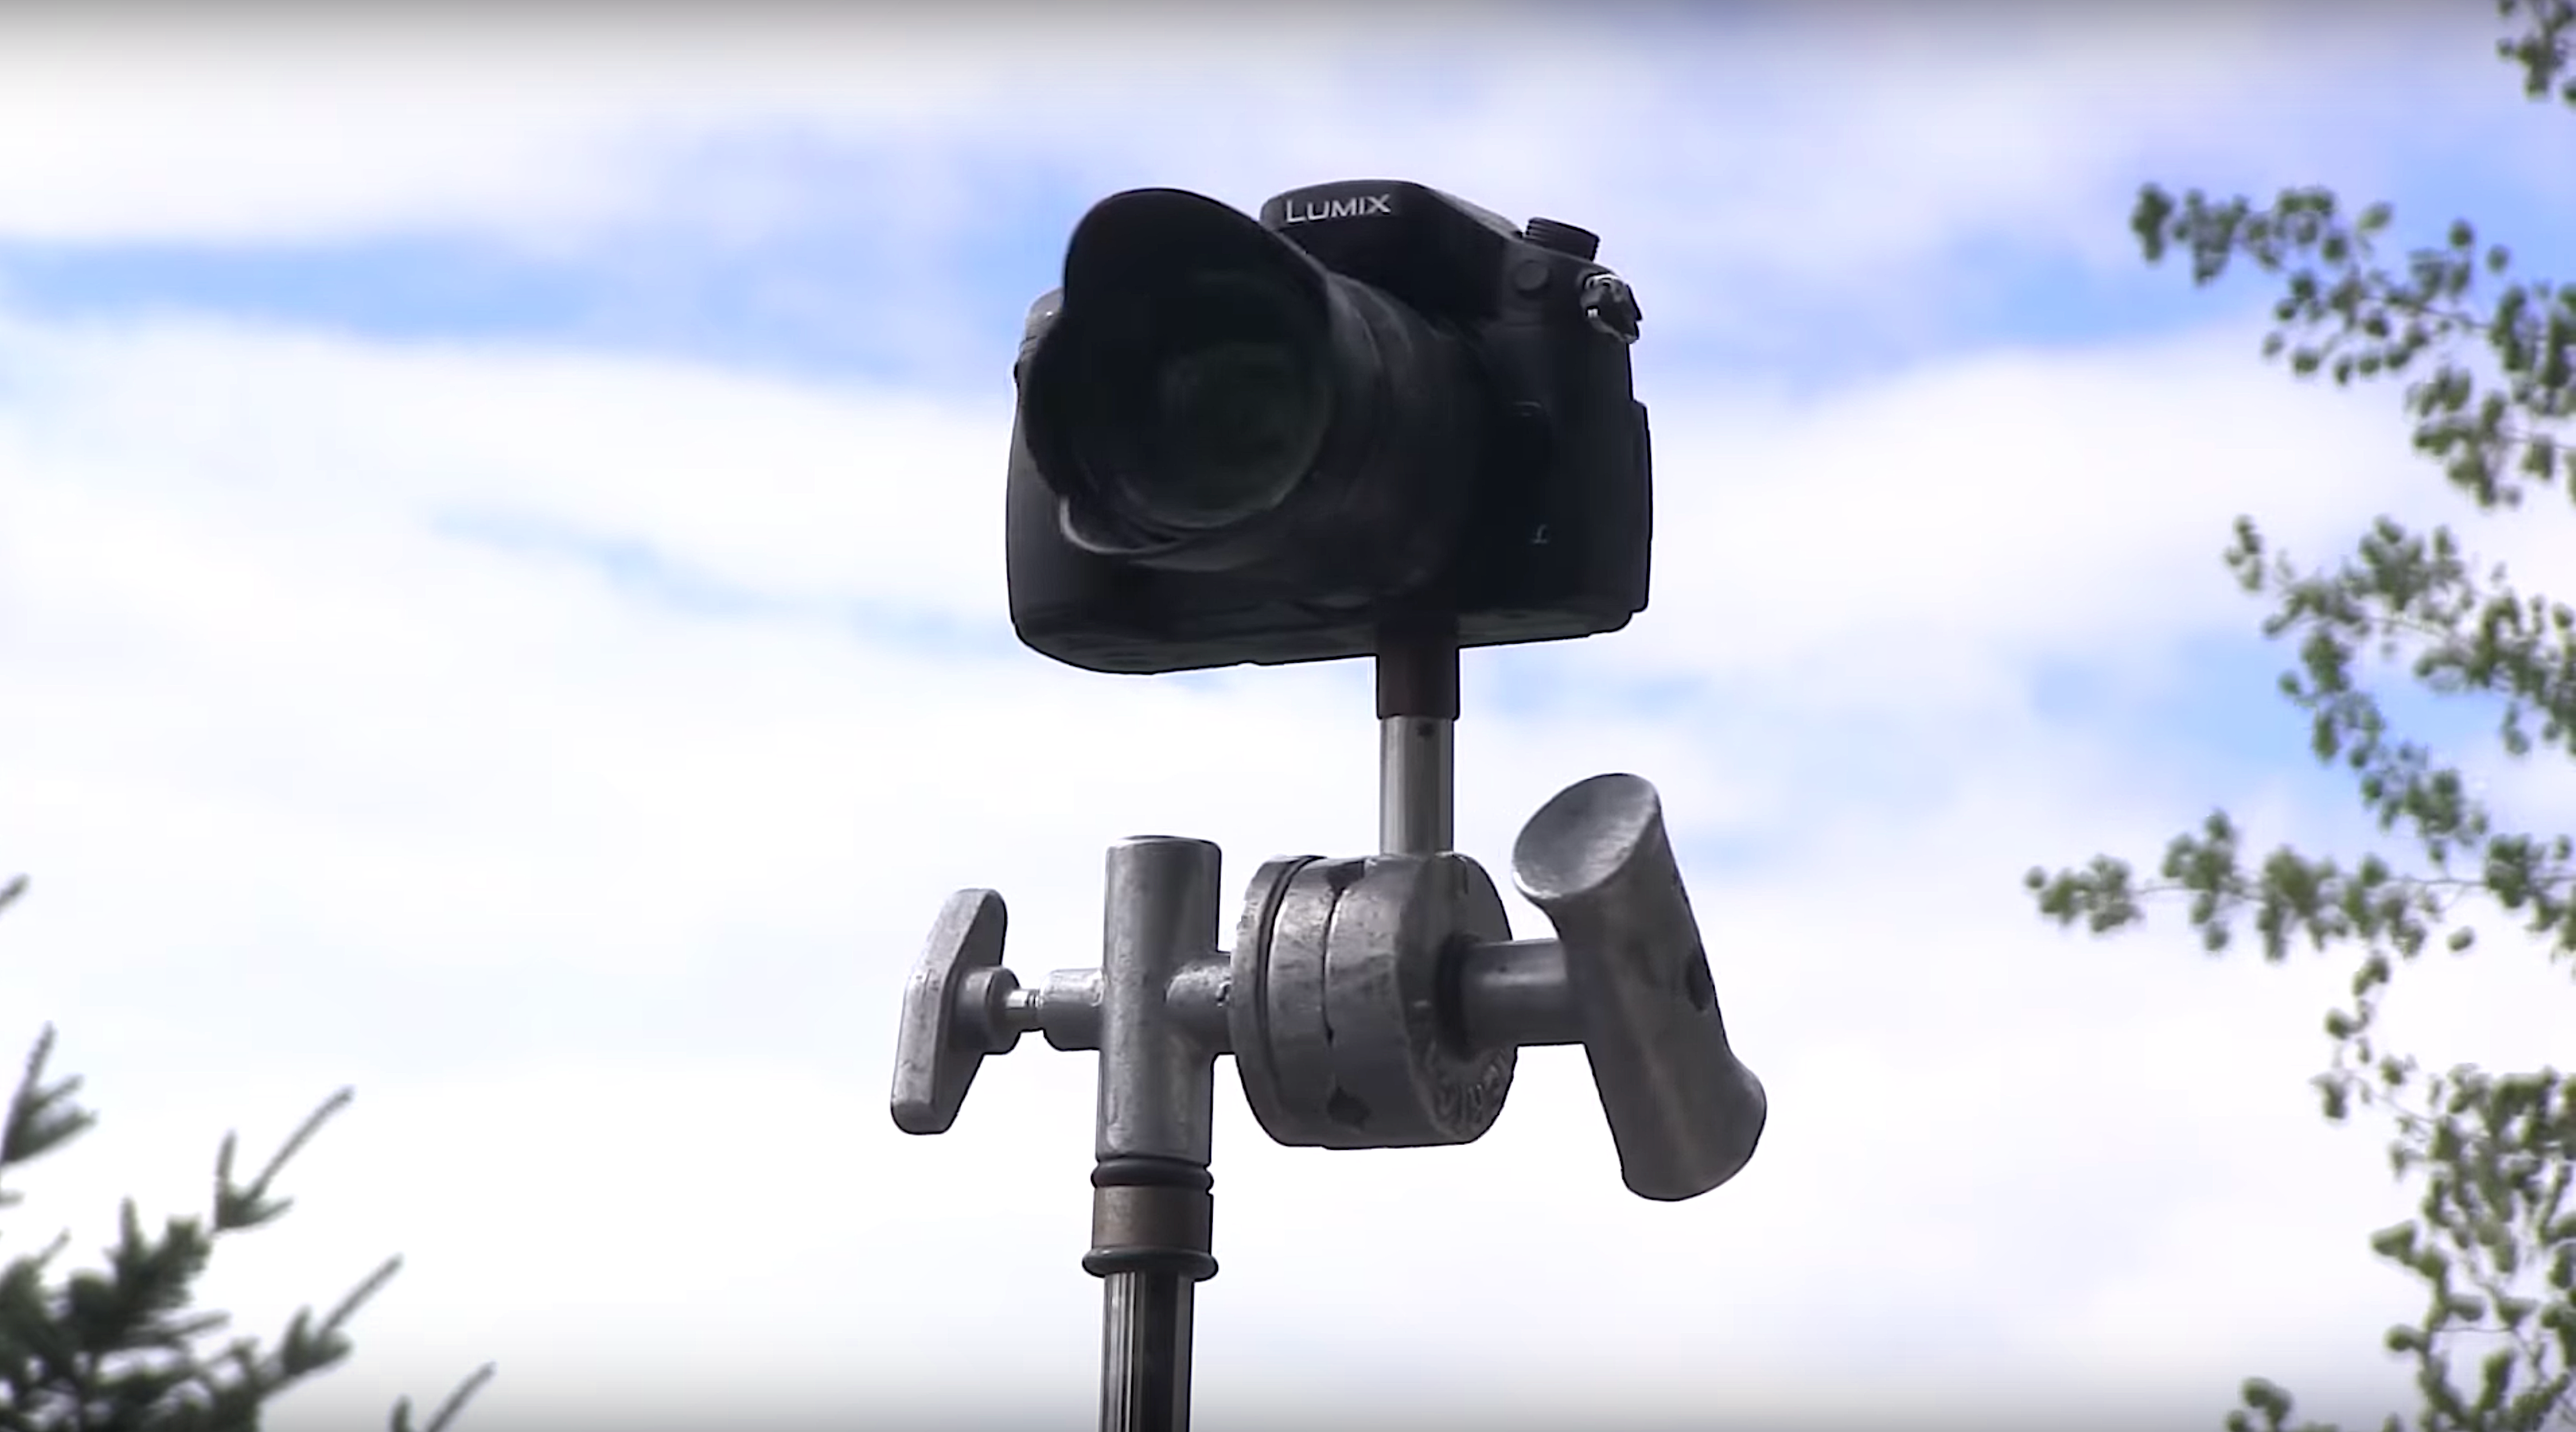 Check Out These Unique Ideas for DIY Camera Rigs